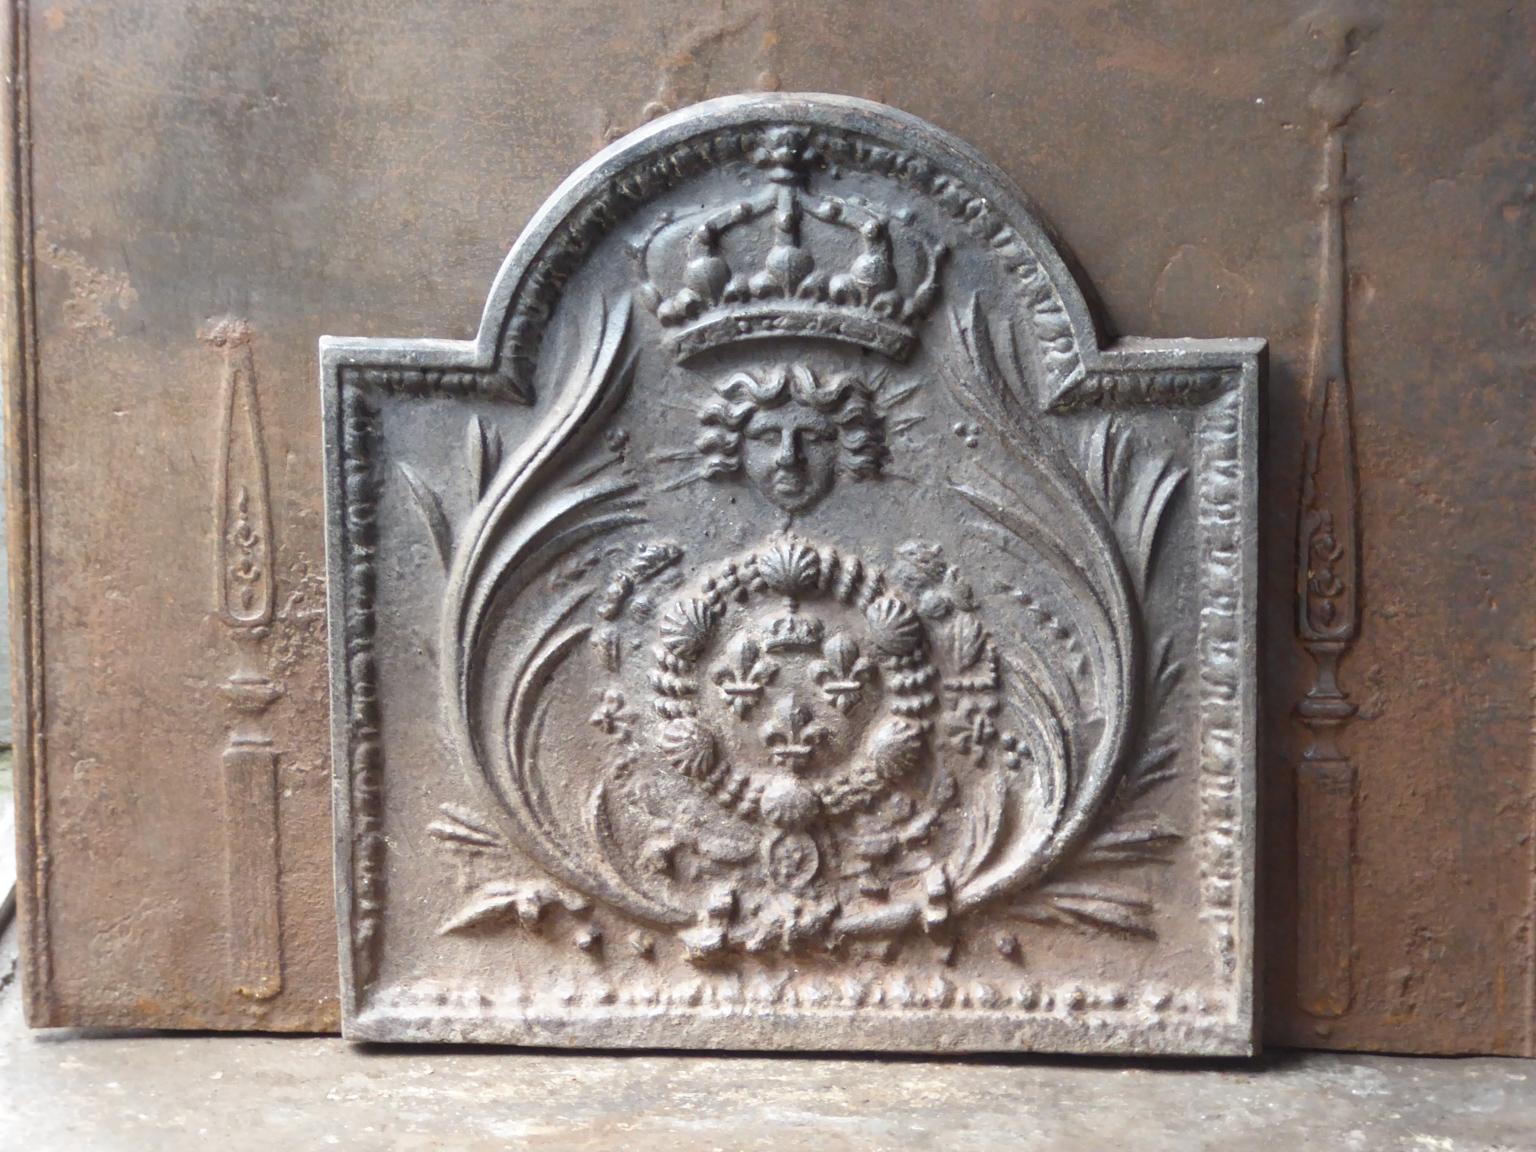 20th century French Louis XIV style fireback with the arms of France. Coat of arms of the House of Bourbon, an originally French royal house that became a major dynasty in Europe. It delivered kings for Spain (Navarra), France, both Sicilies and